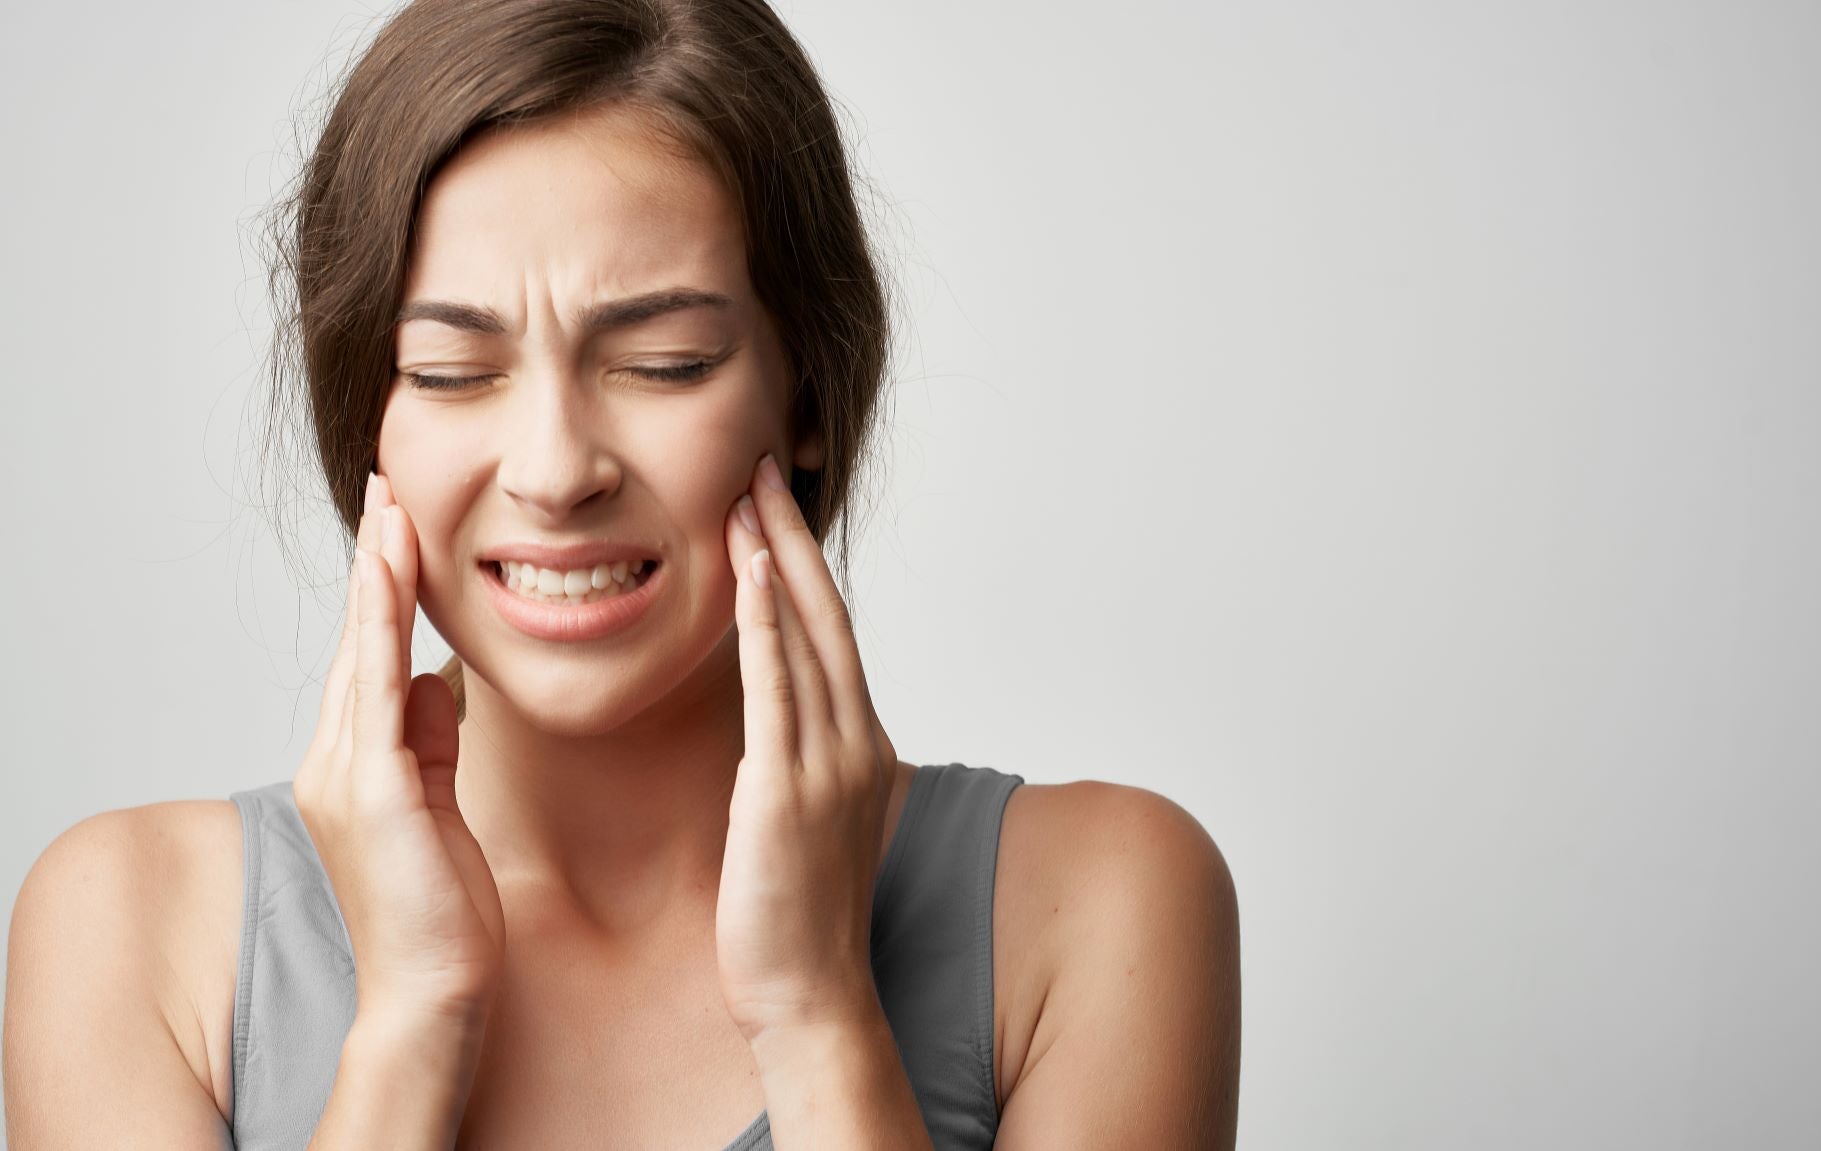 Jaw pain, teeth grinding, clenching are signs that you might need a mouth guard; woman holding jaw in pain